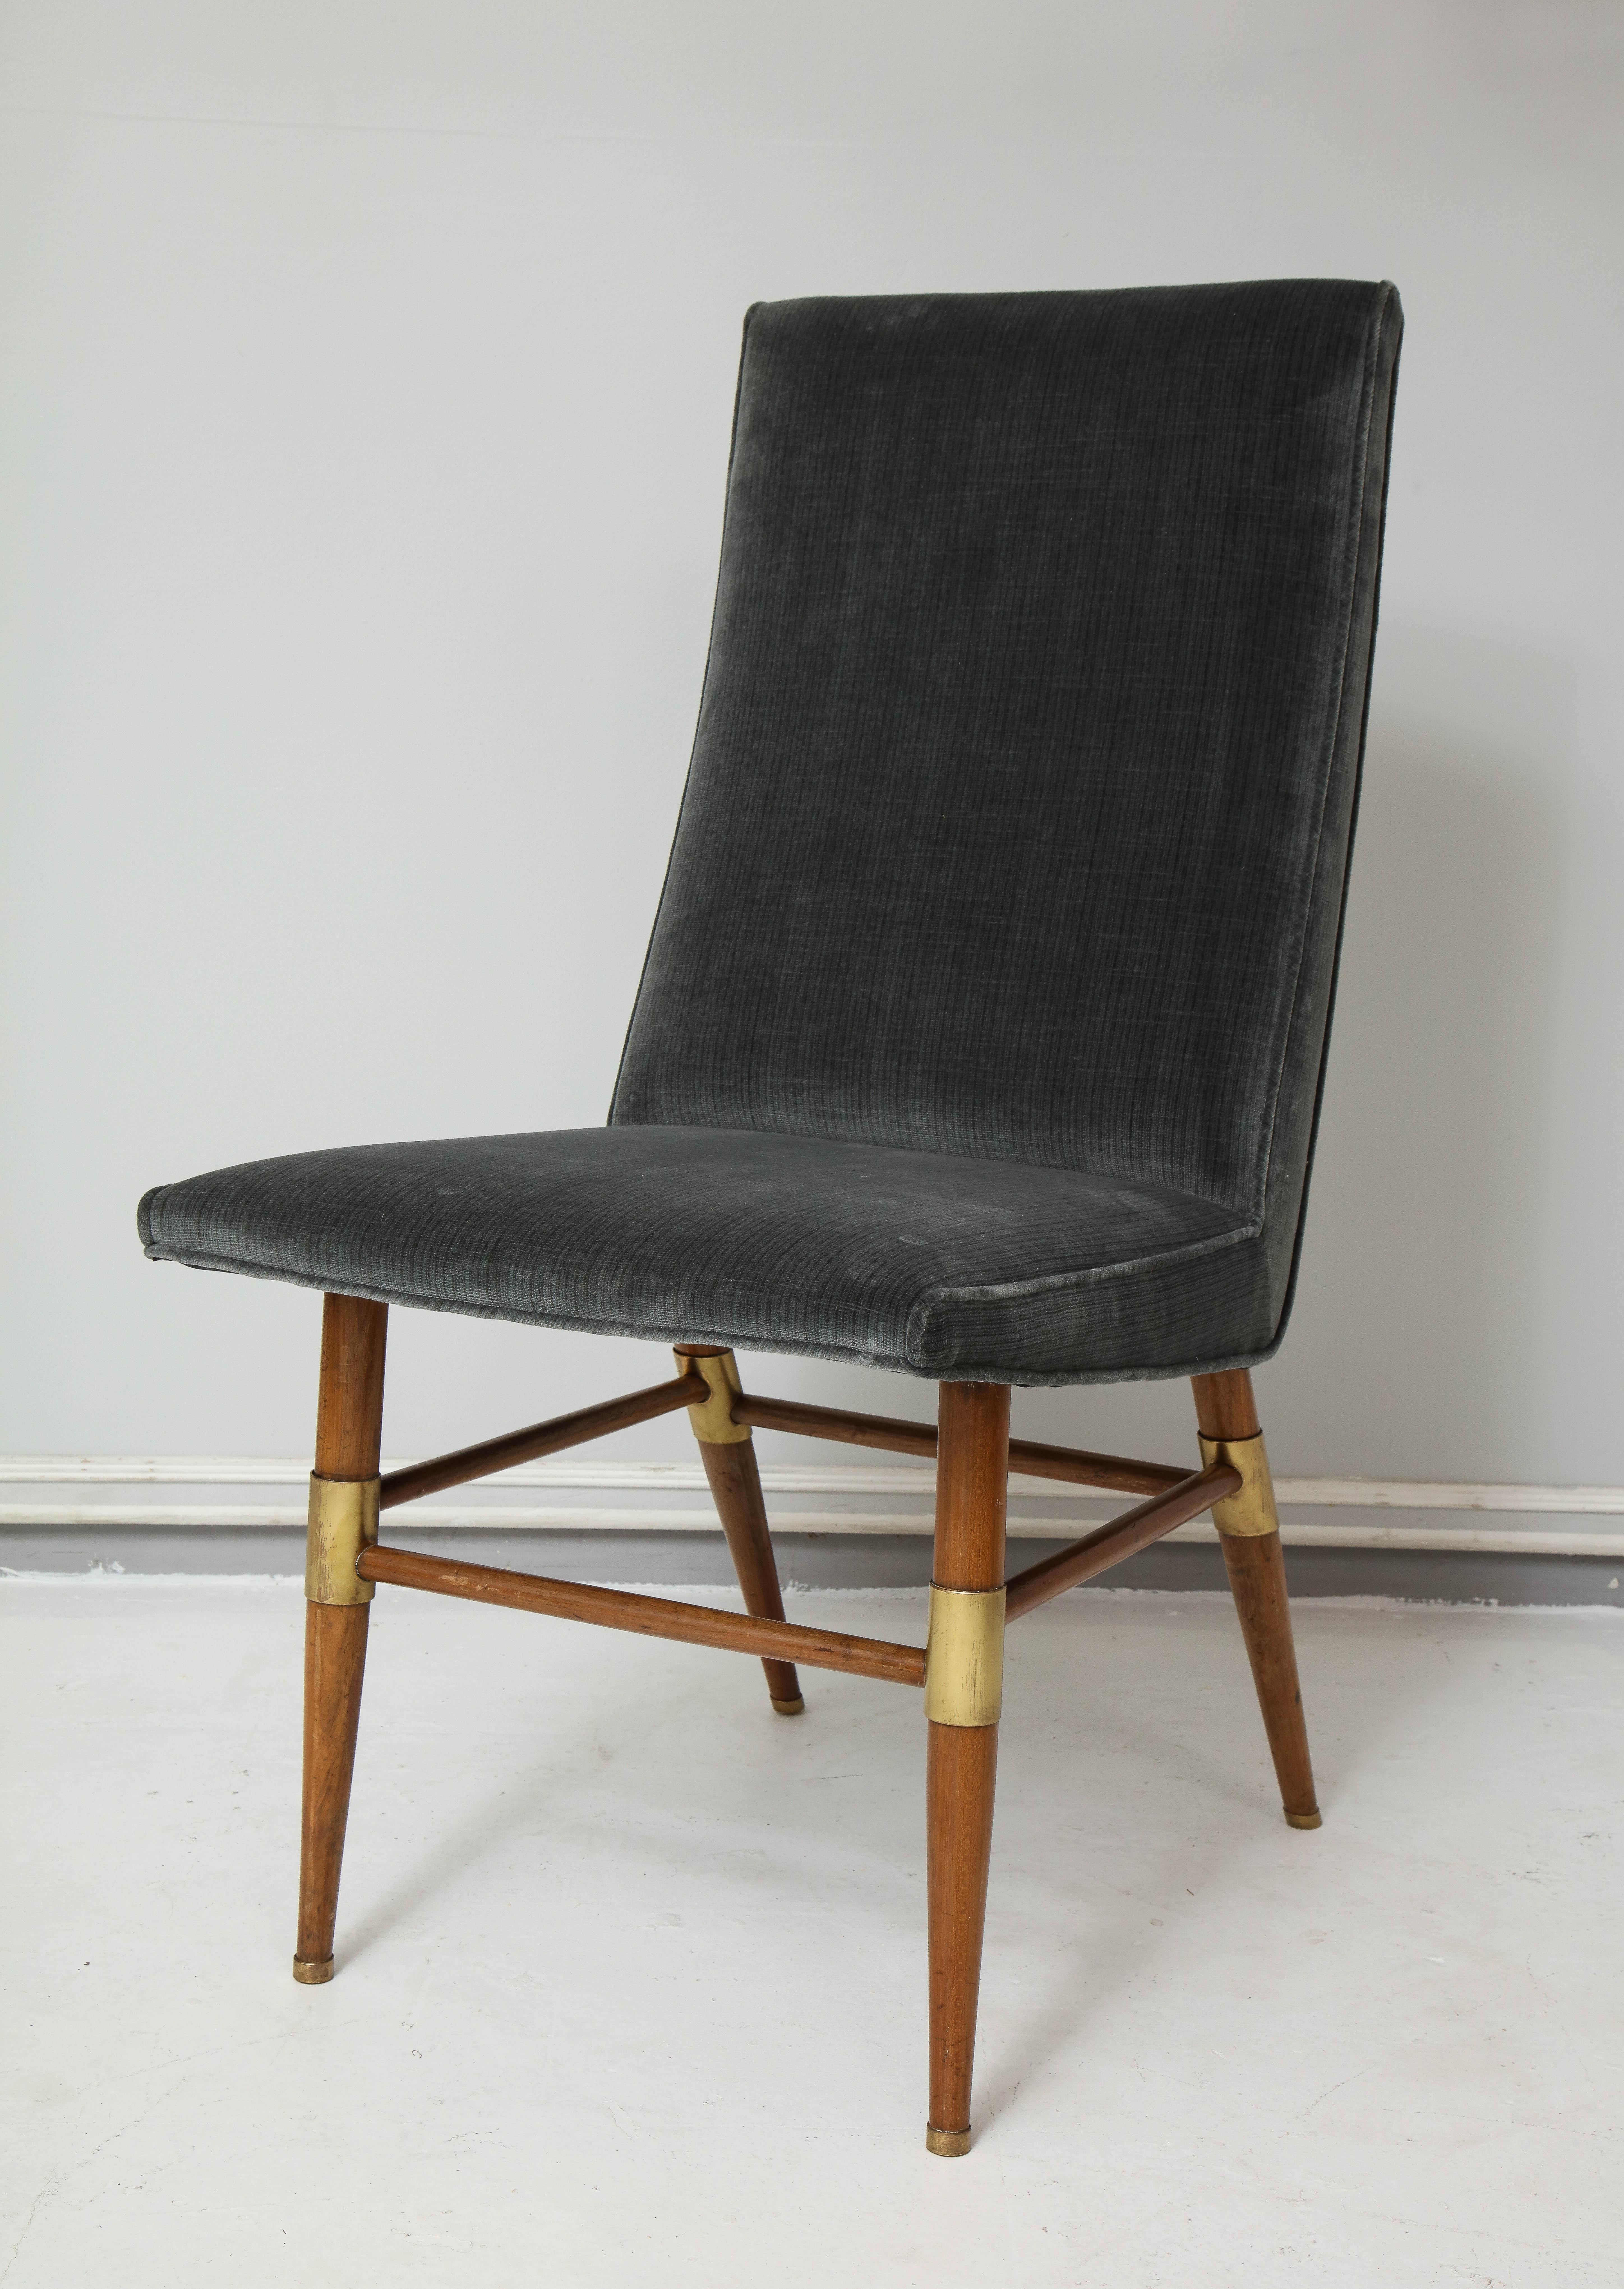 Set of 12 Italian Mid-Century Modern dining chairs.
Please note that we are willing to break up the set.